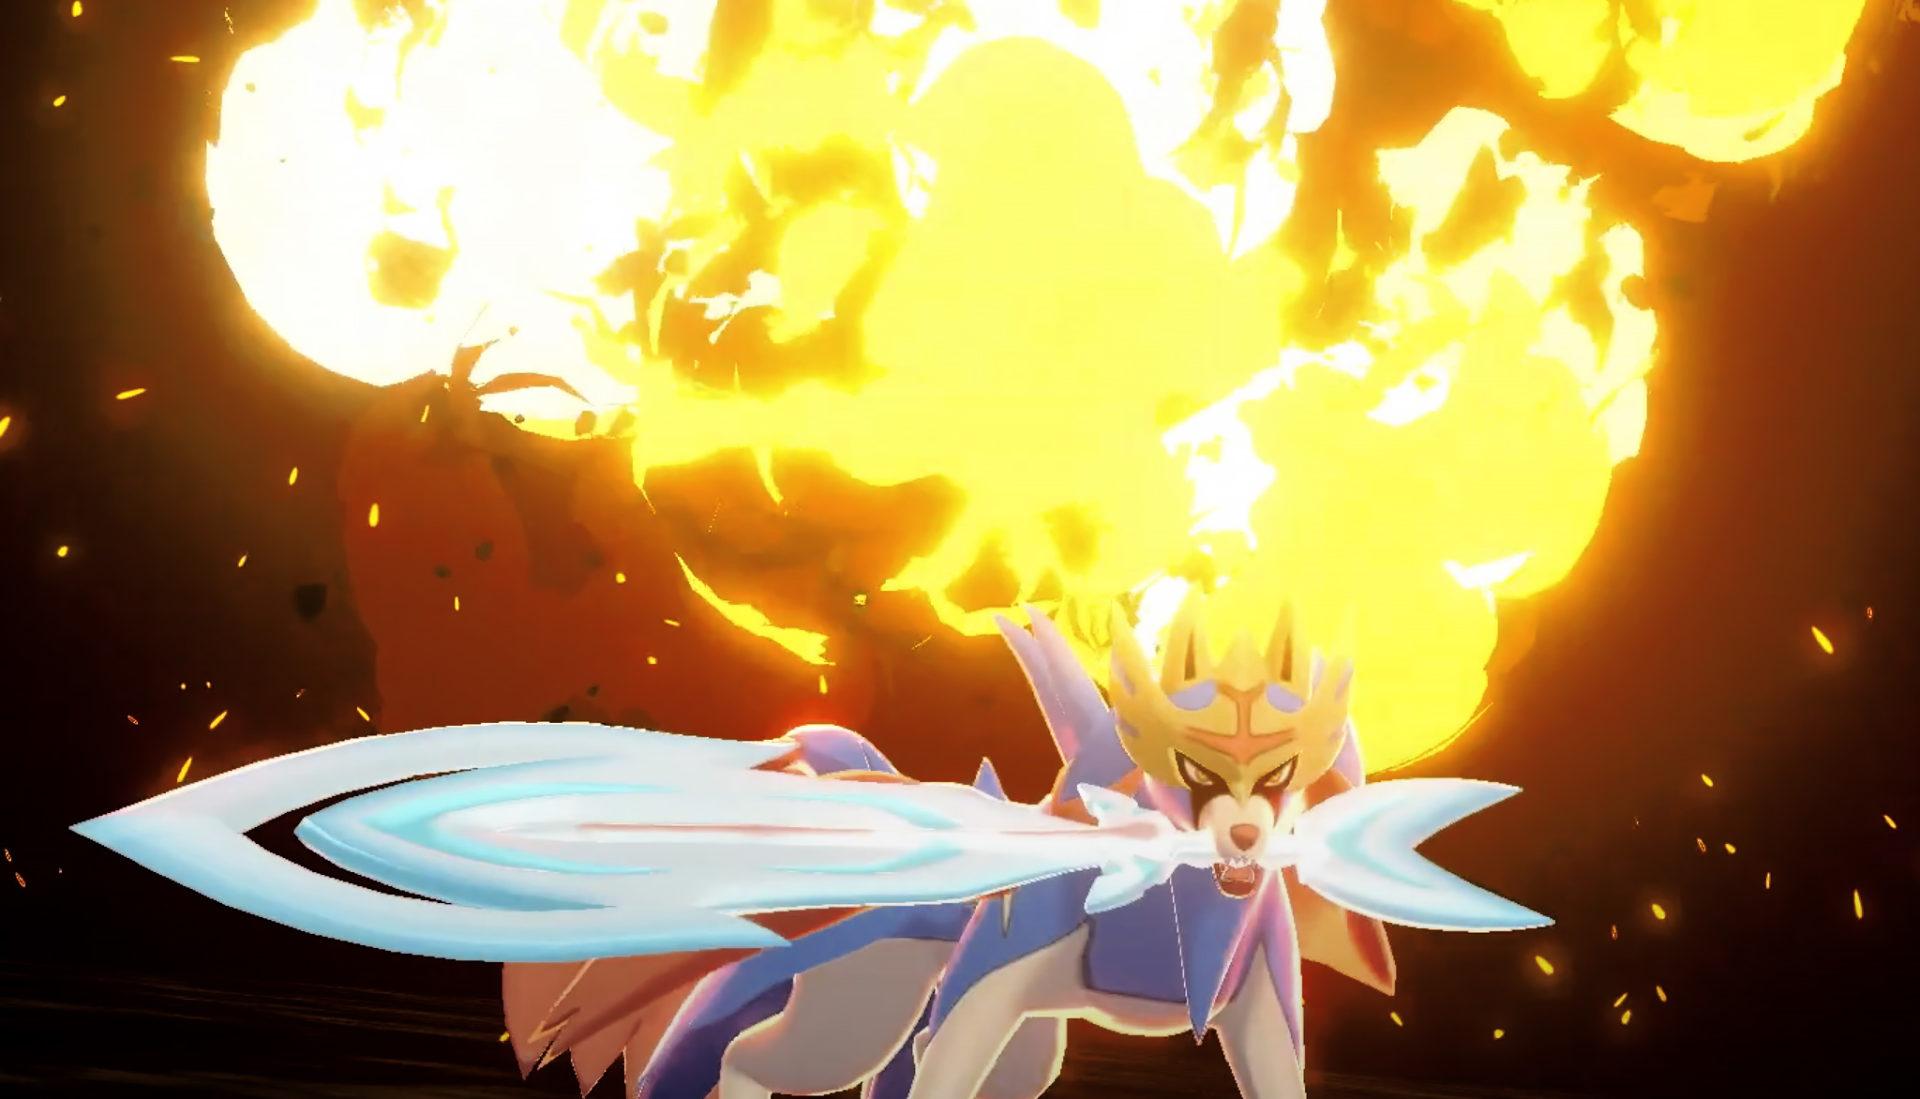 The Best Legendary Pokemon For Sword And Shield Competitive Battling